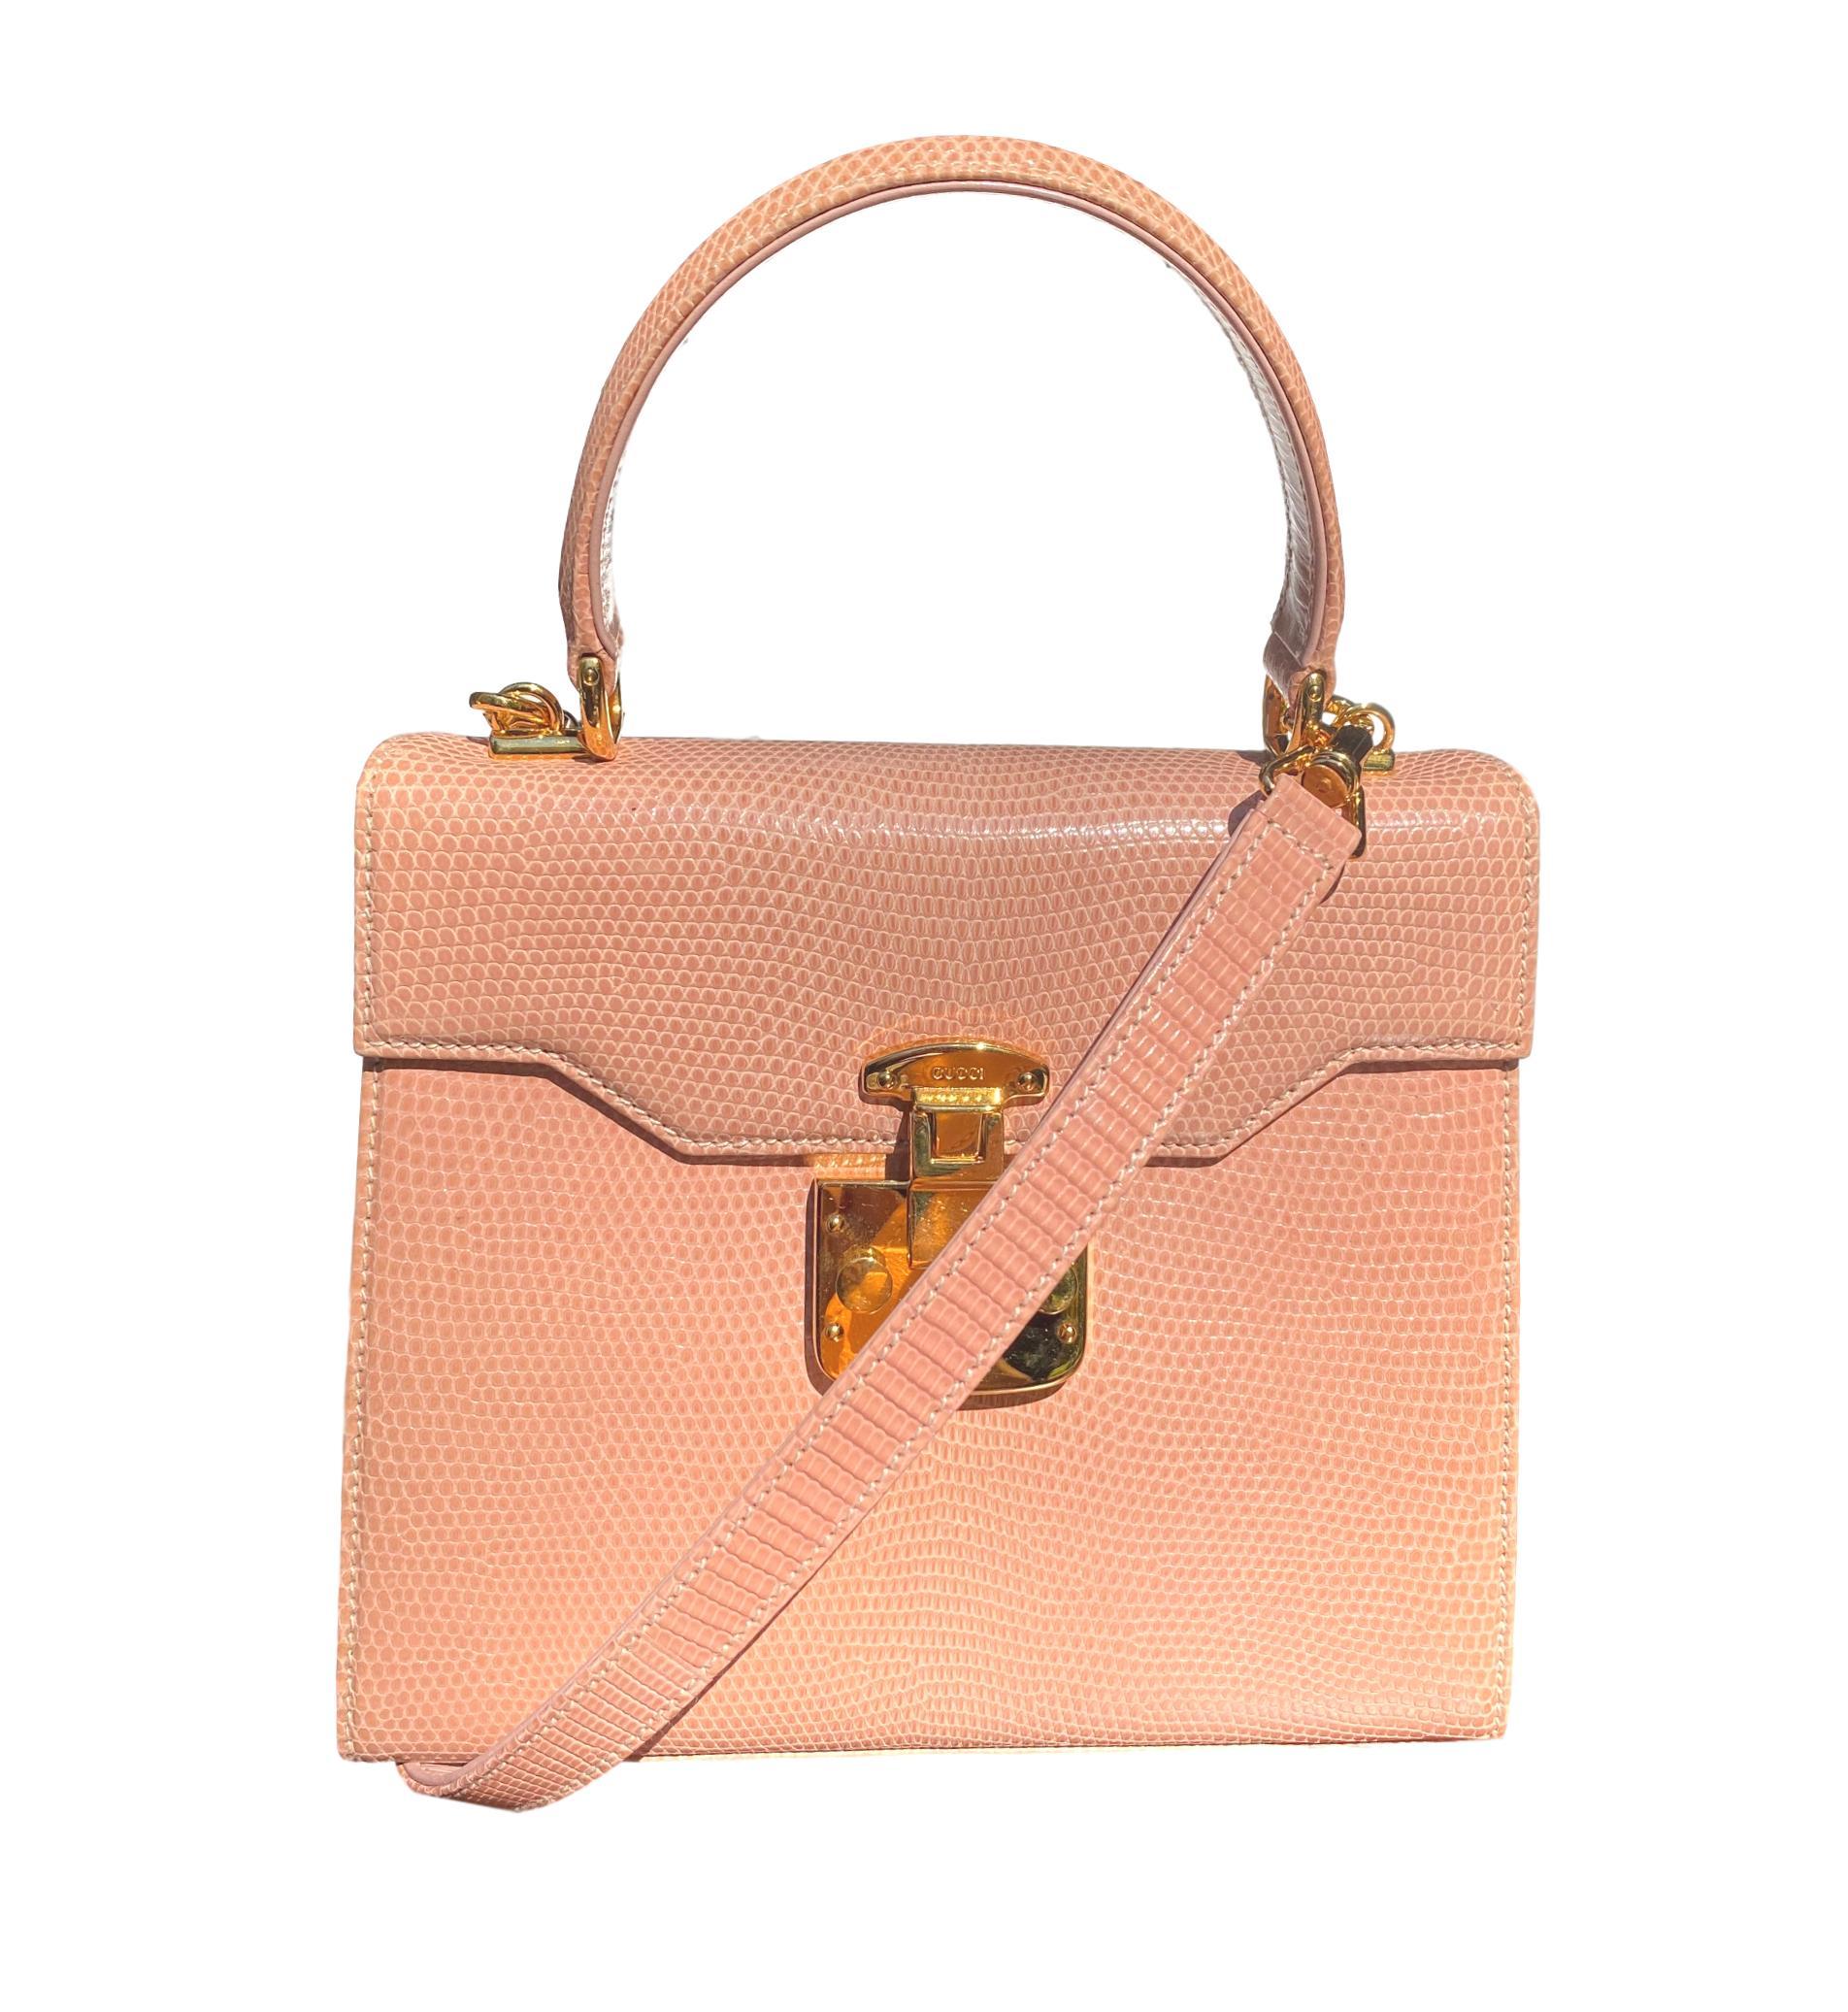 Gucci Exotic Lizard Blush Top Handle Kelly Style Shoulder Bag 3